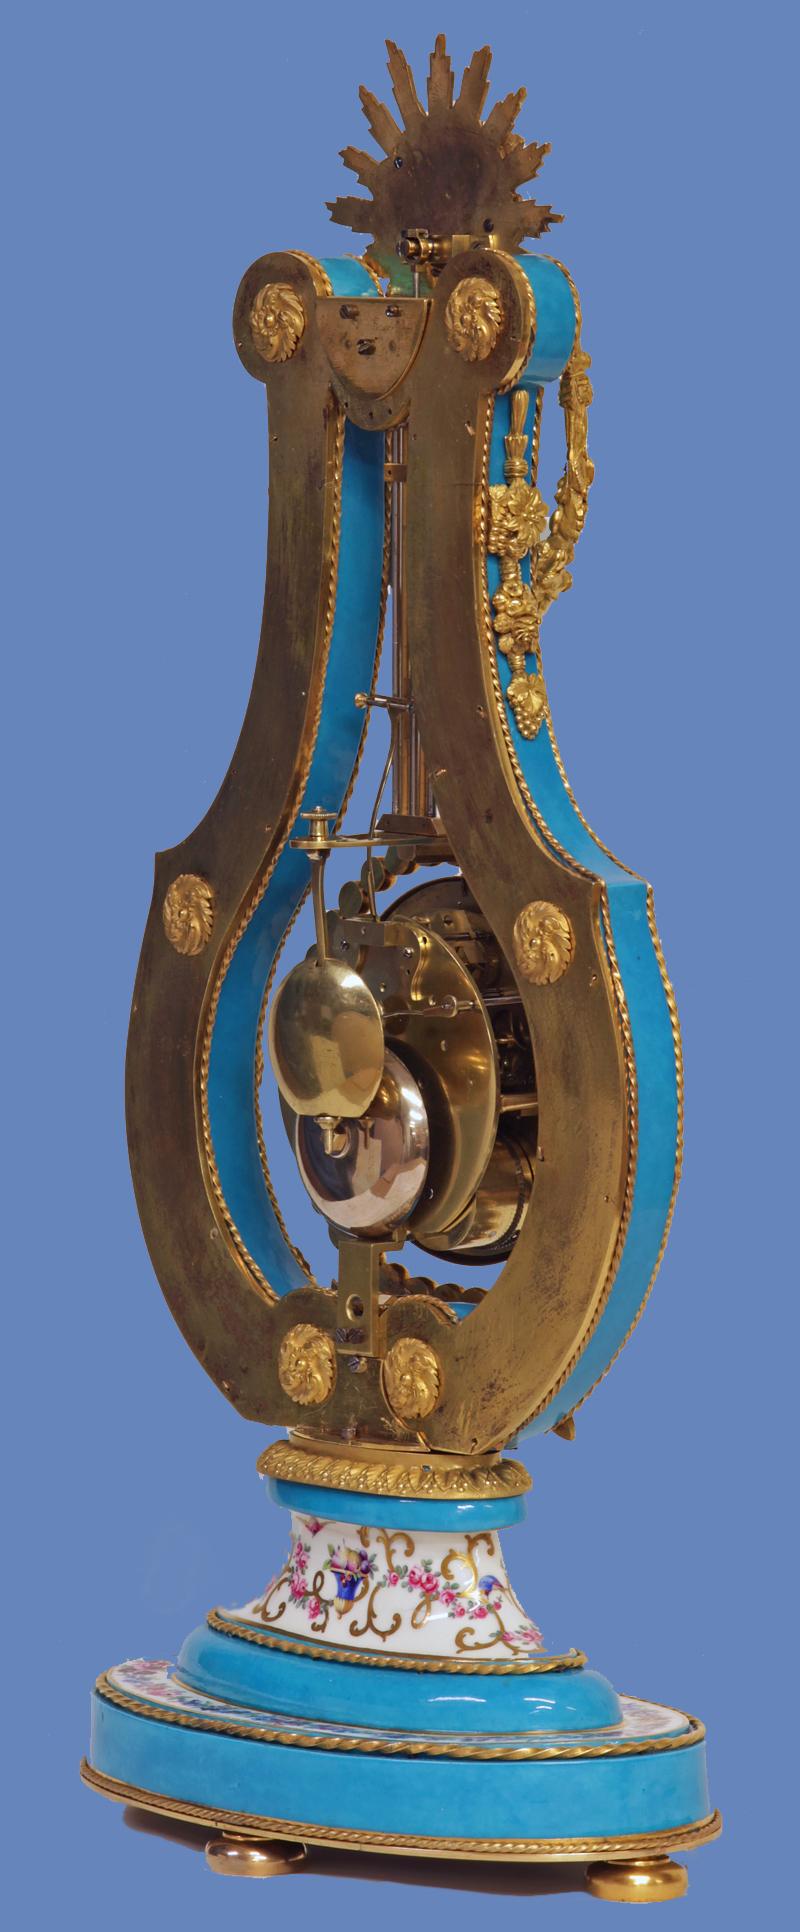 19th Century c.1820 Very Rare Ormolu and ‘bleu turquoise’ Porcelain Lyre Clock For Sale